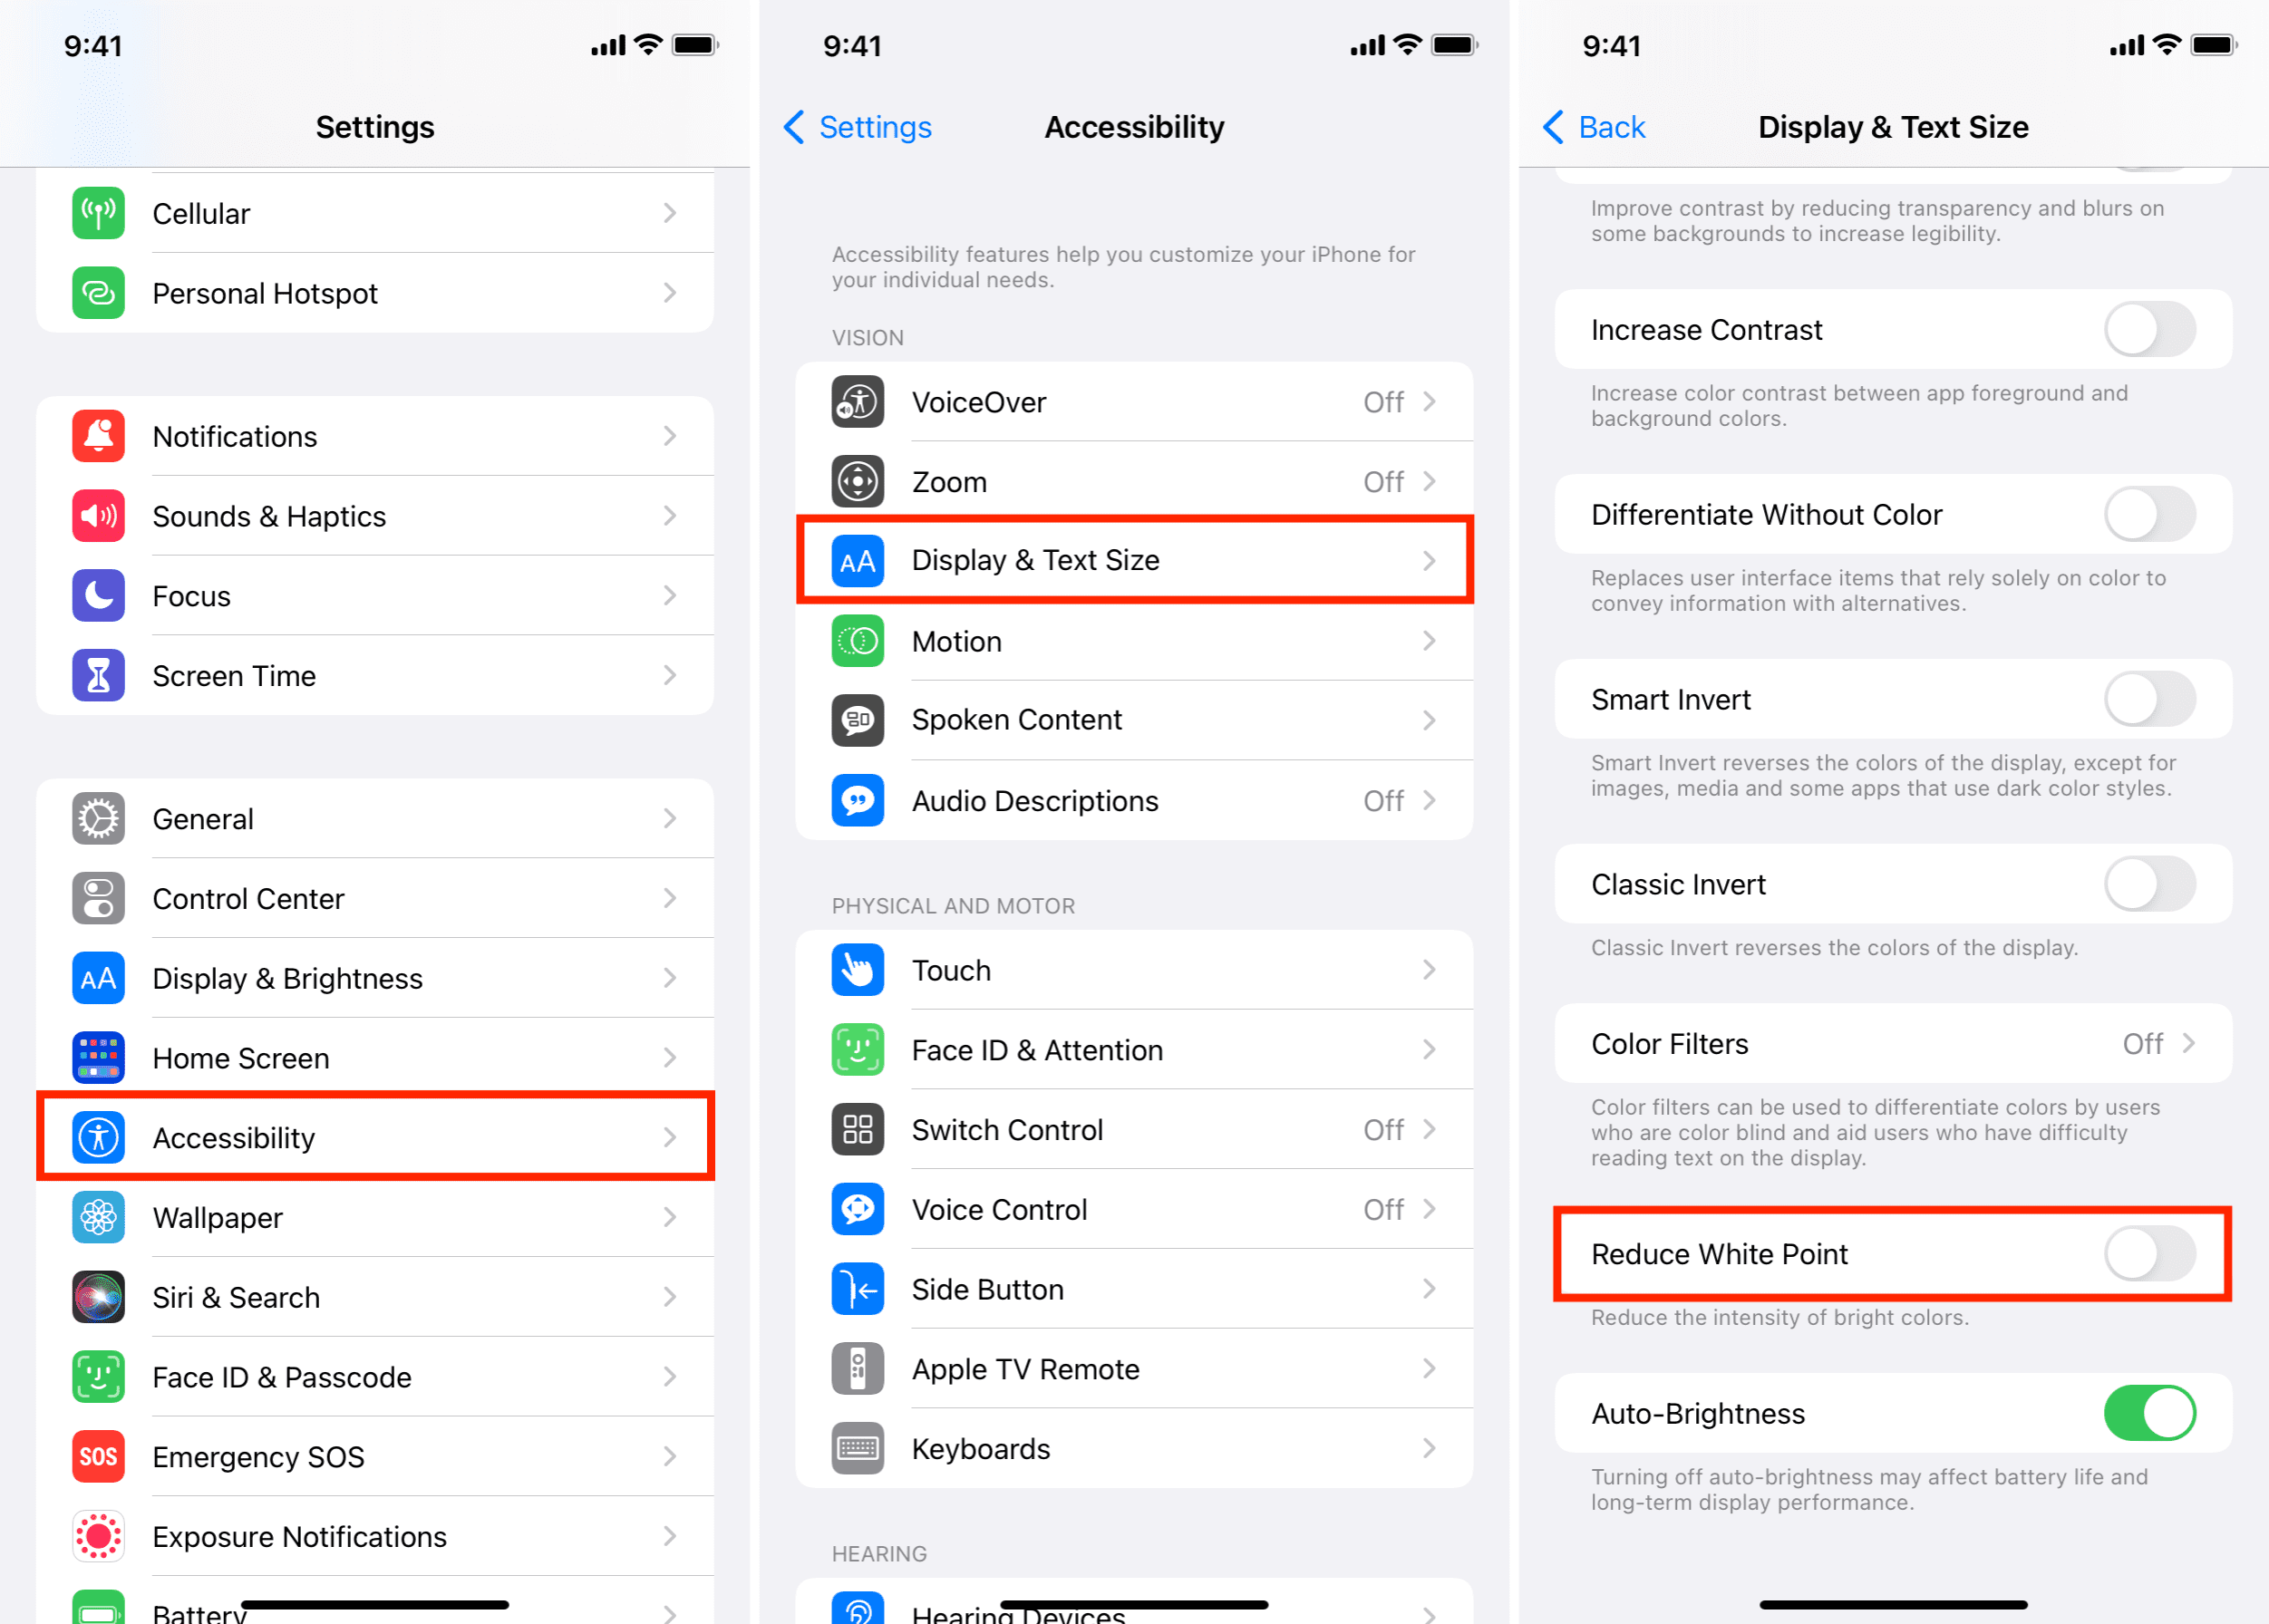 Disable Reduce White Point to make dim iPhone screen brighter